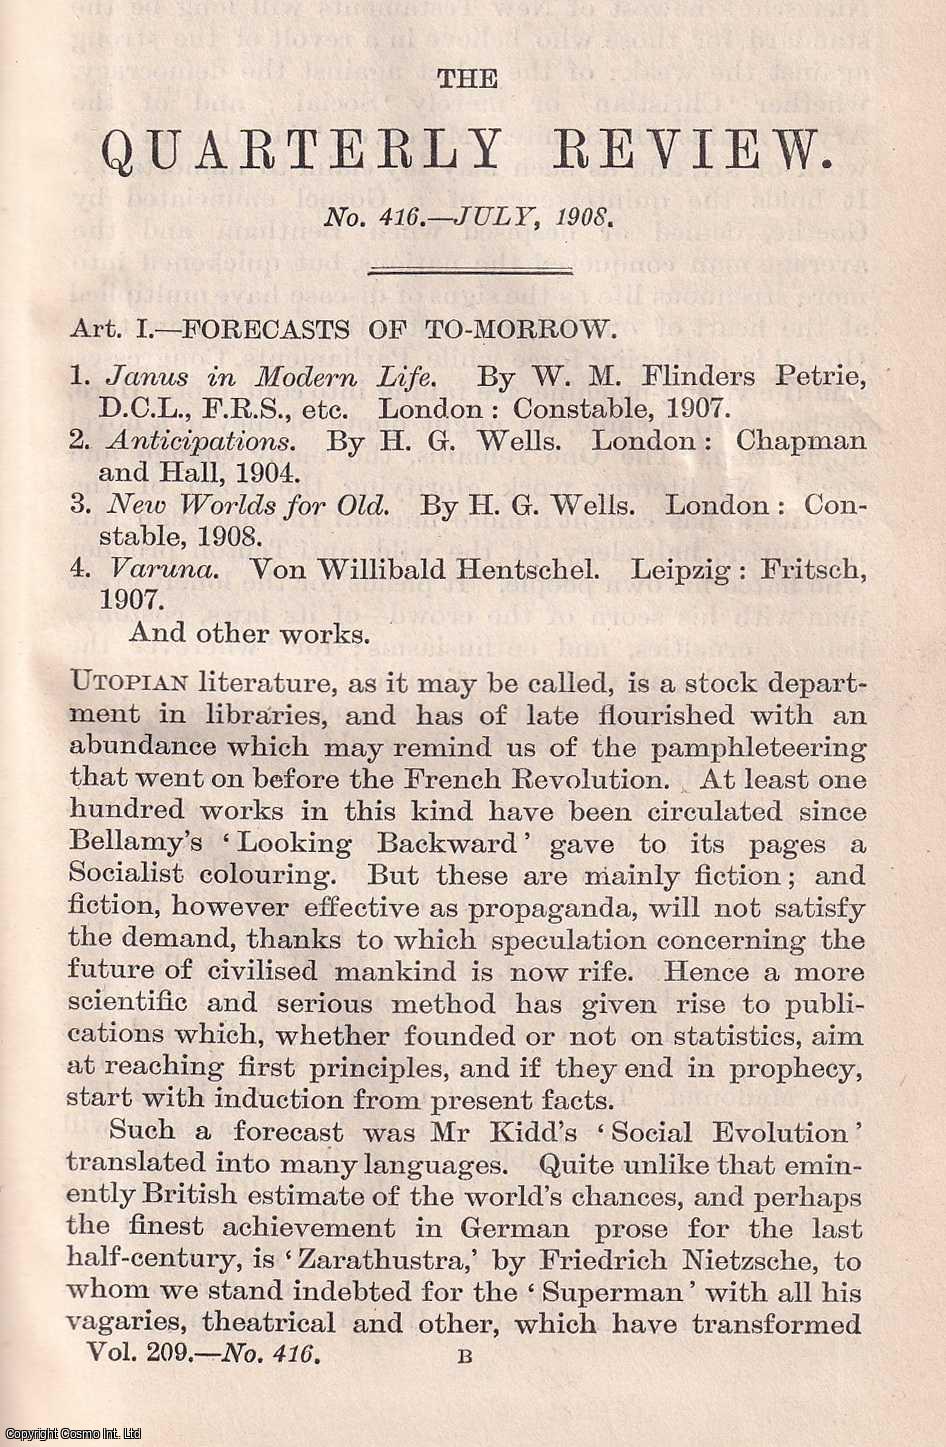 William Barry - Forecasts Of Tomorrow; H.G. Wells & Others. An uncommon original article from The Quarterly Review, 1908.